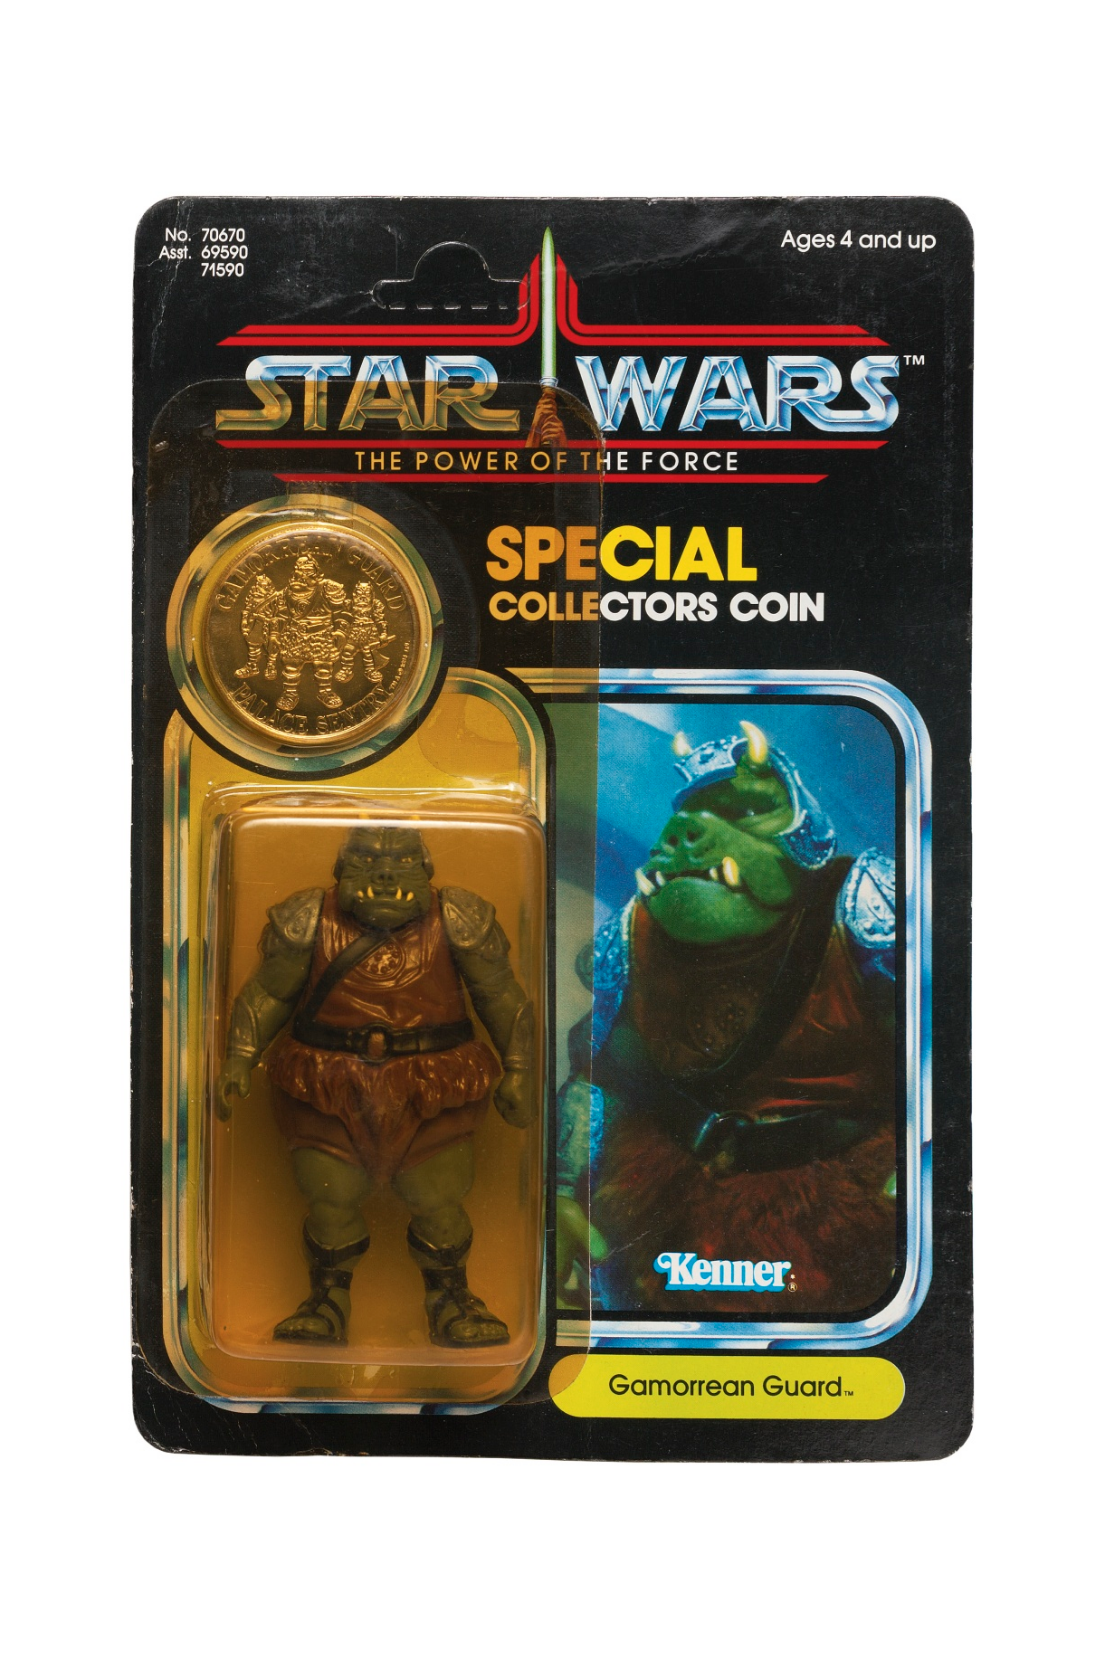 Rare Star Wars Collectibles And Toys You Can Buy Today